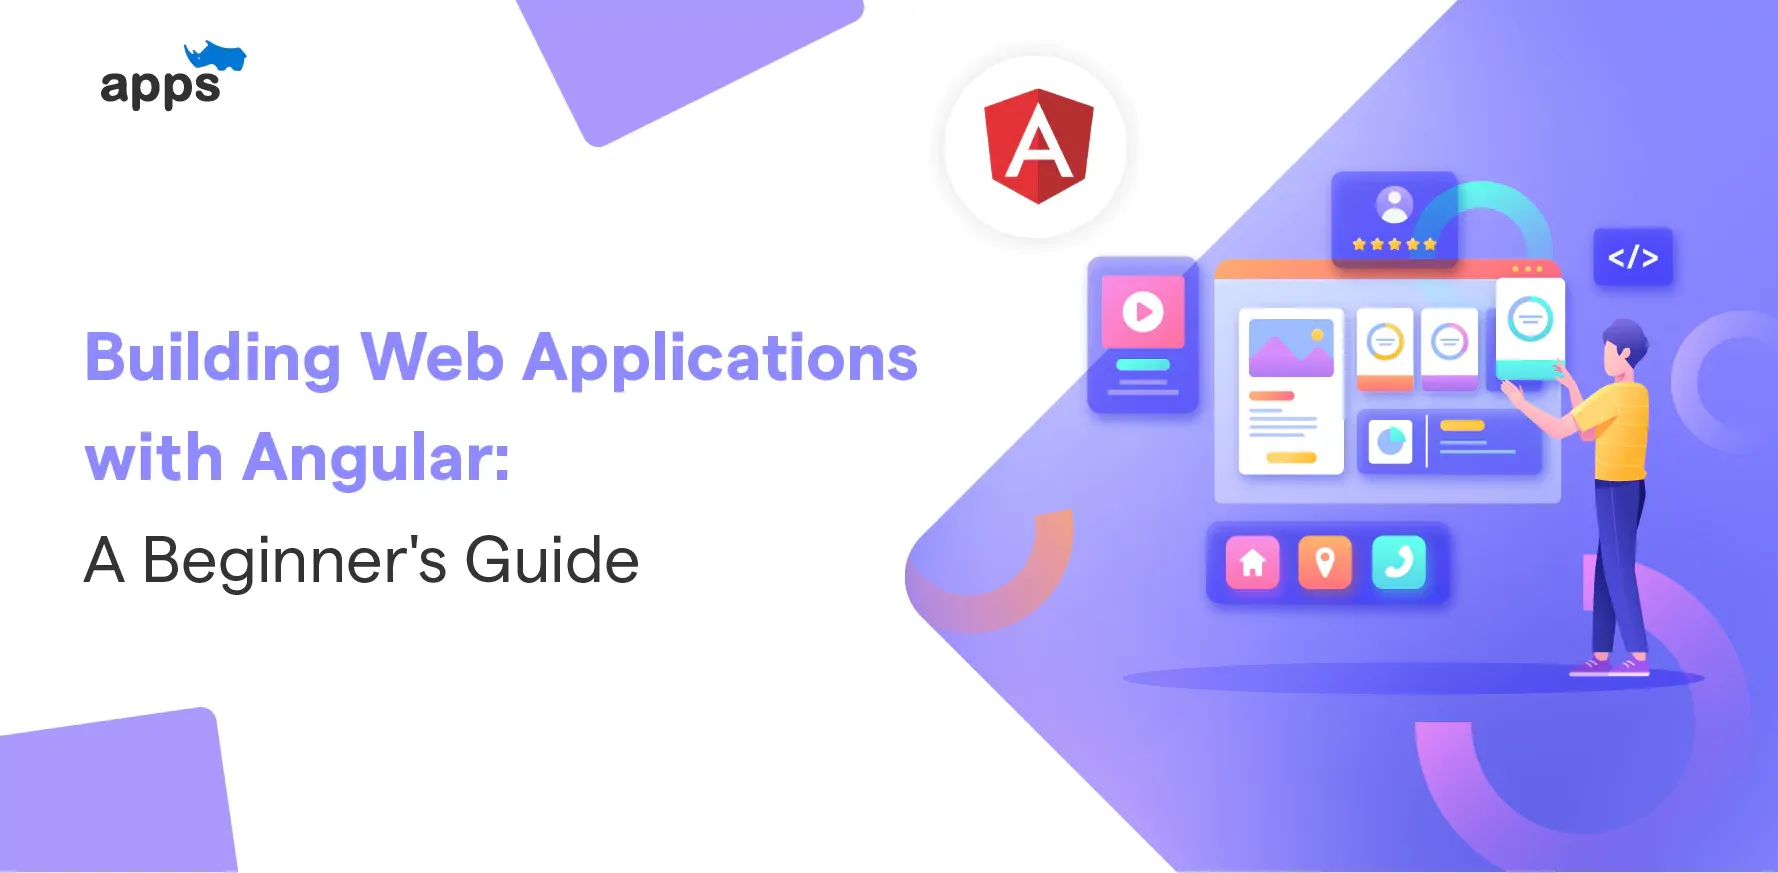 Building Web Applications with Angular: A Beginner's Guide